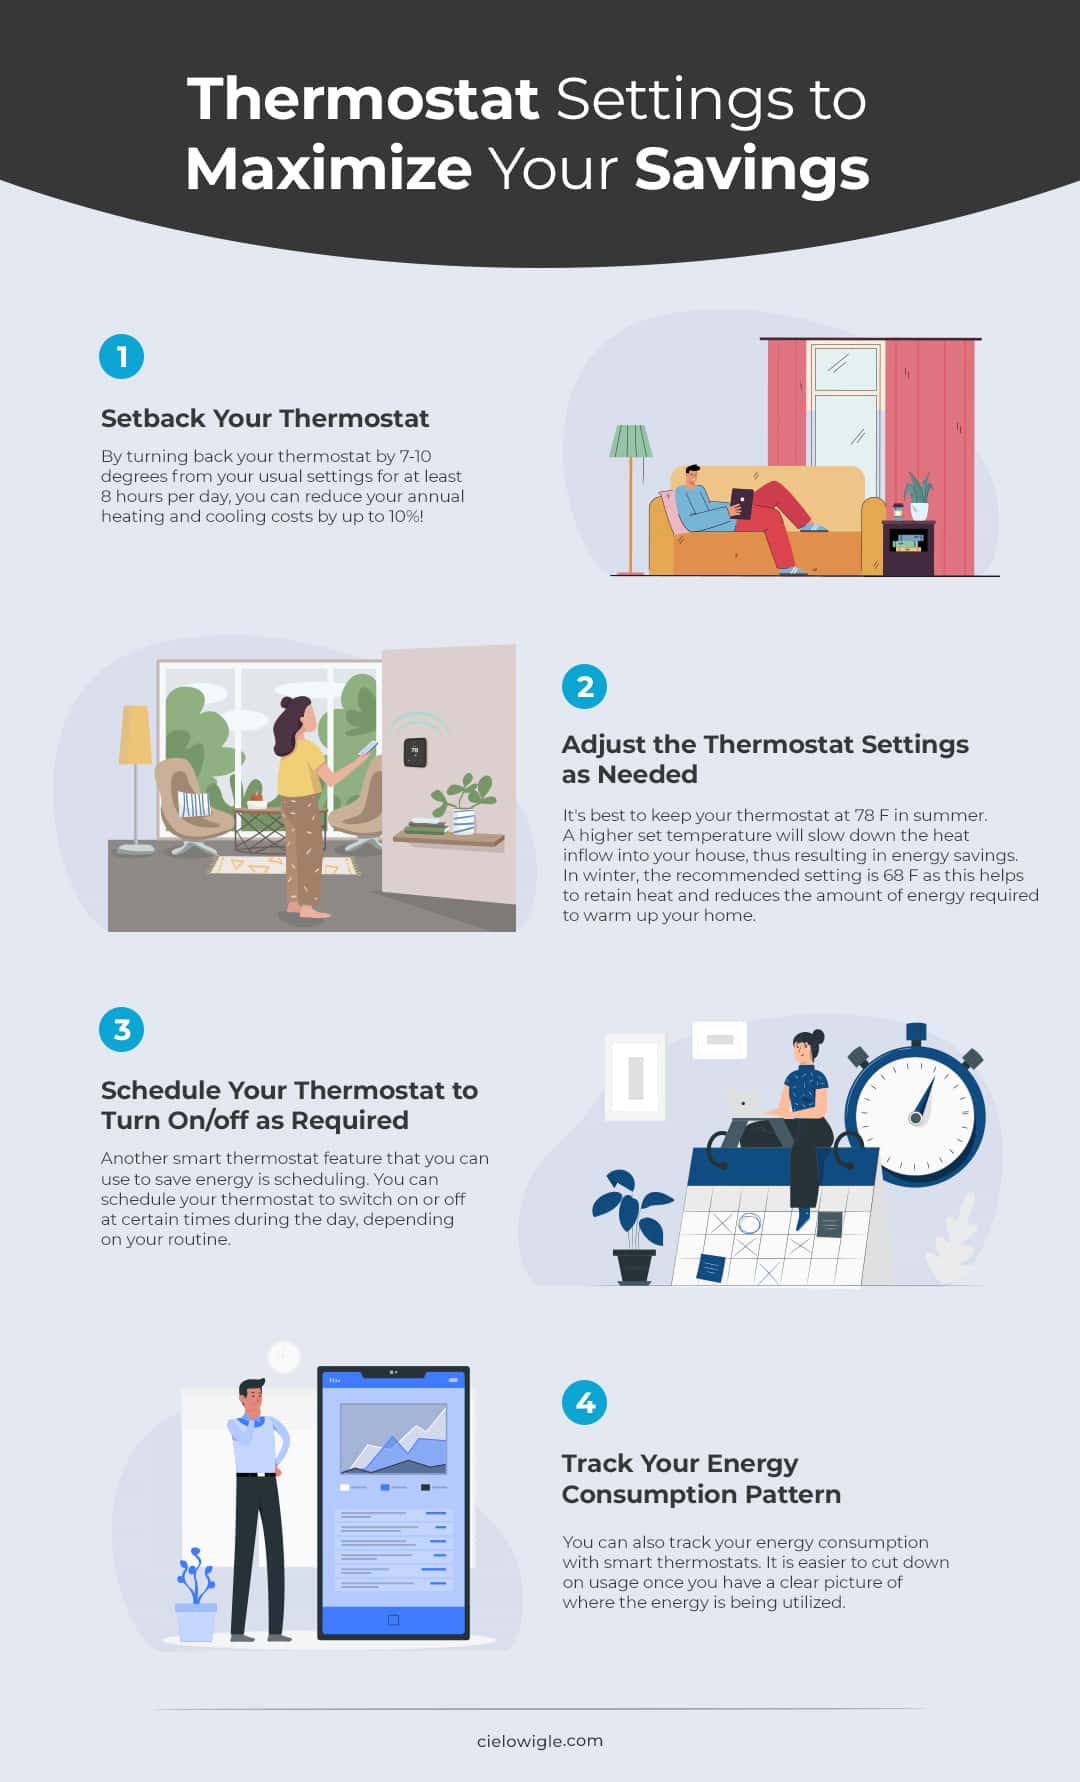 How to Set Your Thermostat for Energy Savings